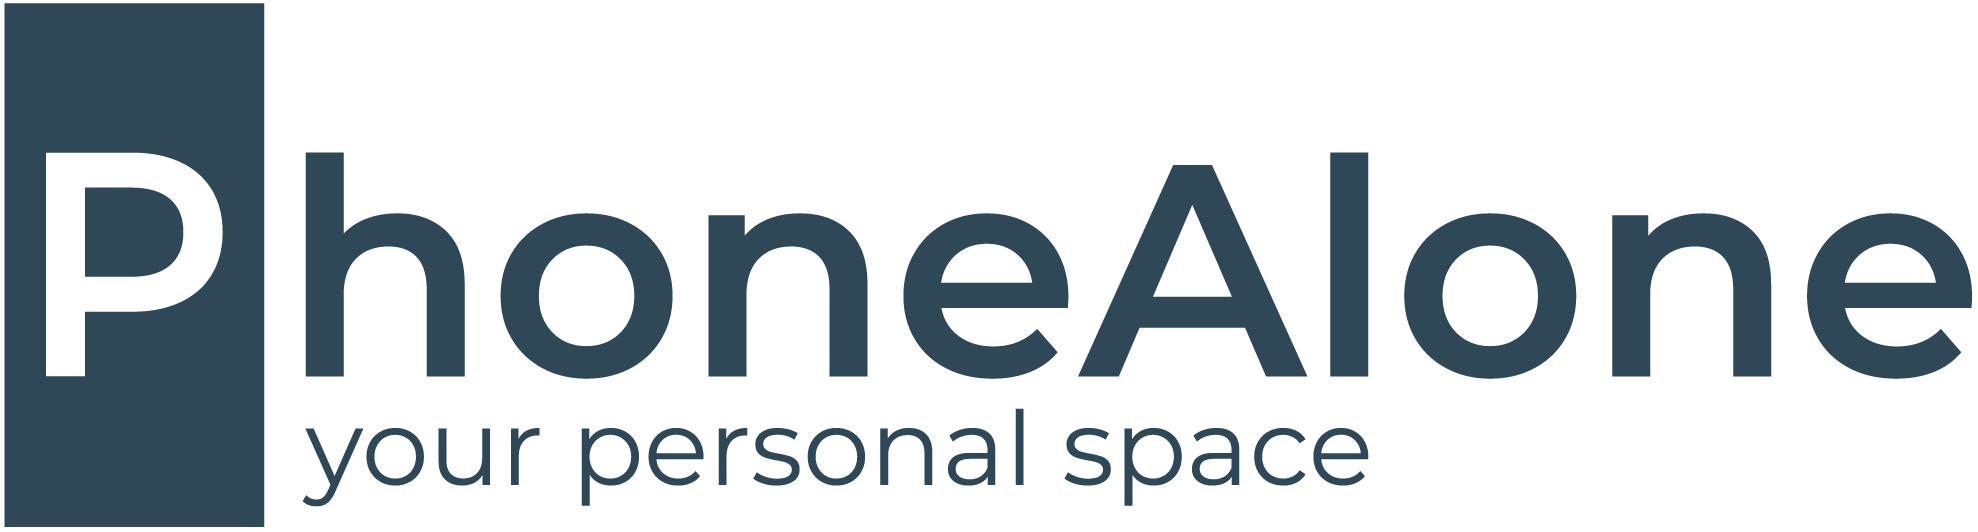 PhoneAlone - your personal space blåt logo med tagline